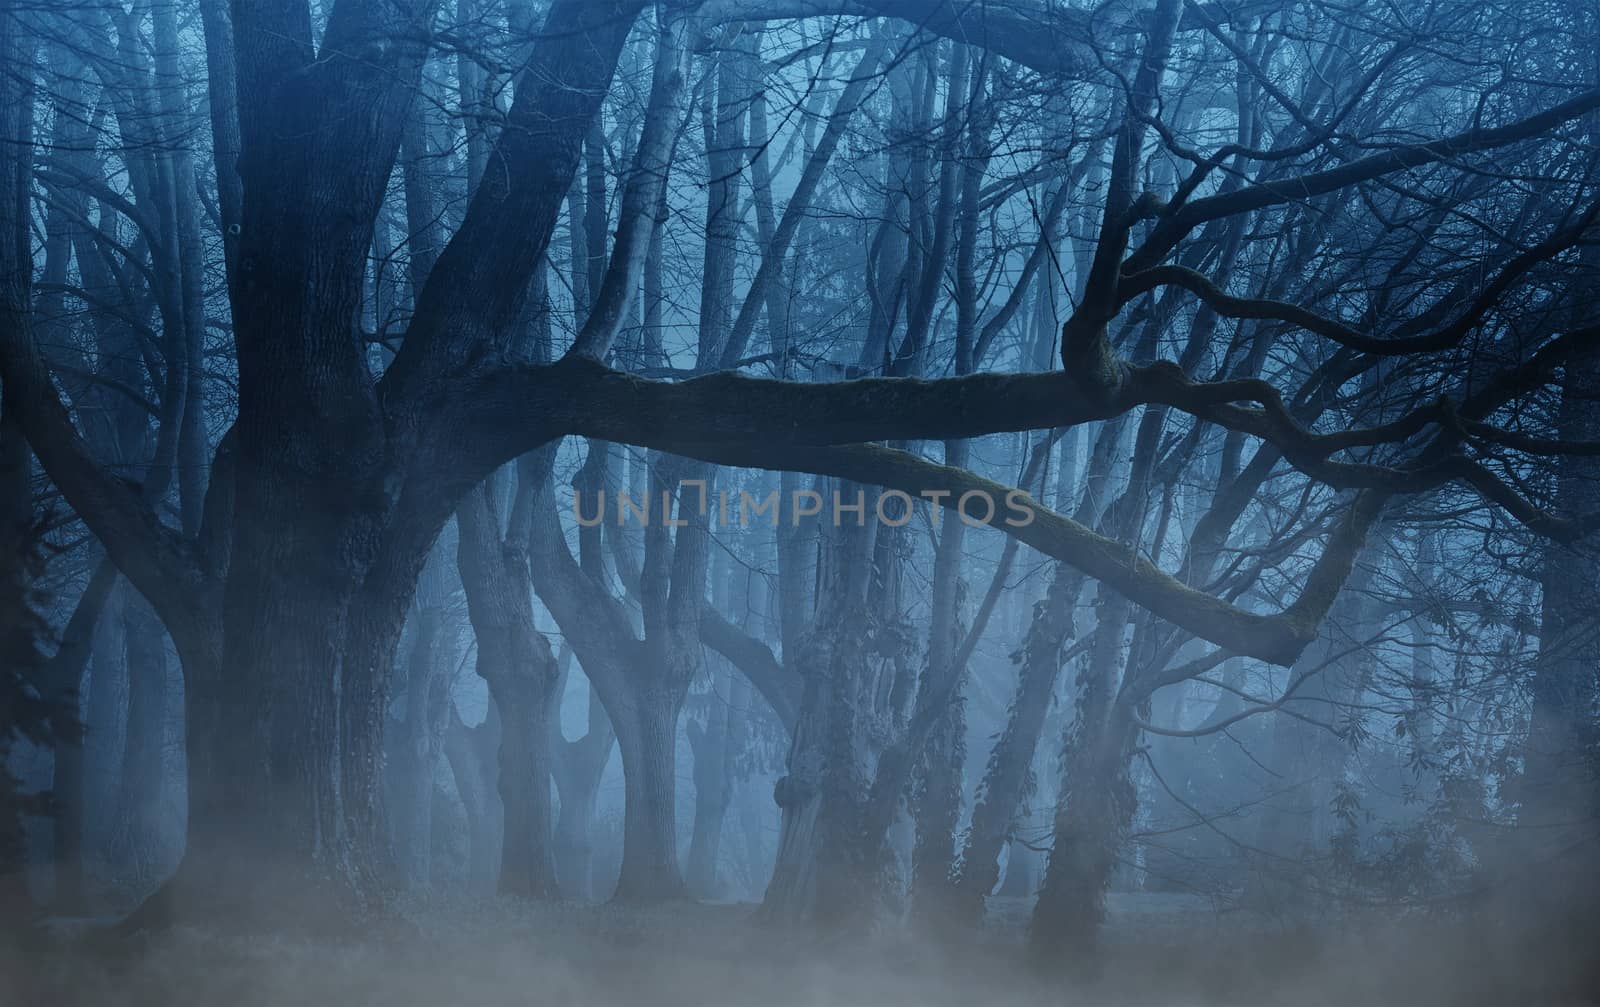 In images magical gate in a mysterious forest with fog